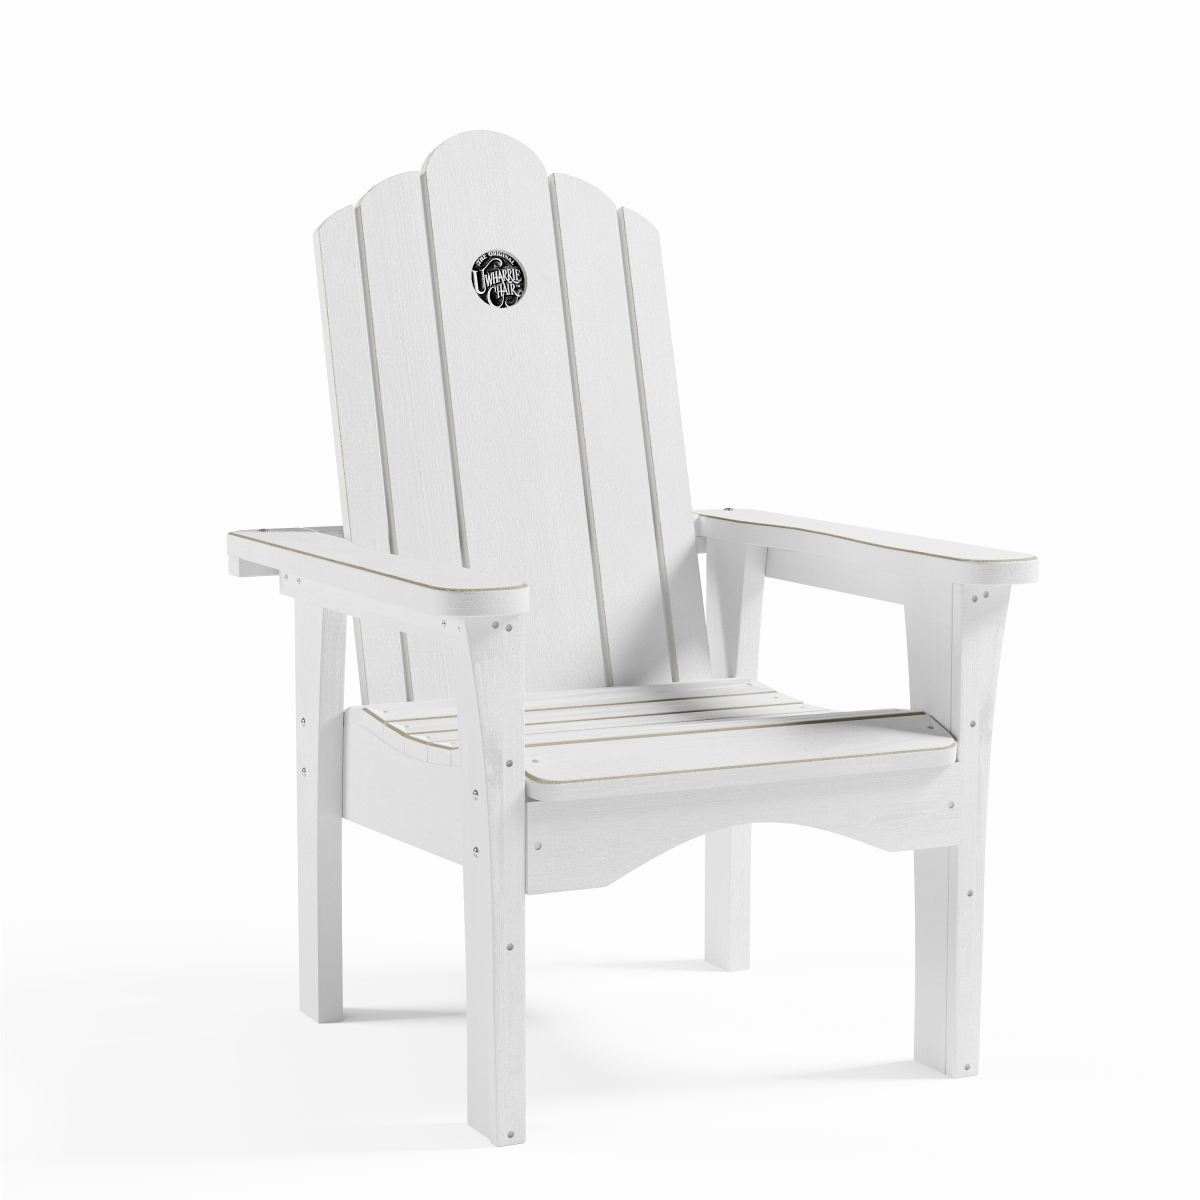 UWharrie Chair S214-043 Opal Wood Lounge Chair, Persimmon Pine - 30.5 x 33.5 x 43.5 in.